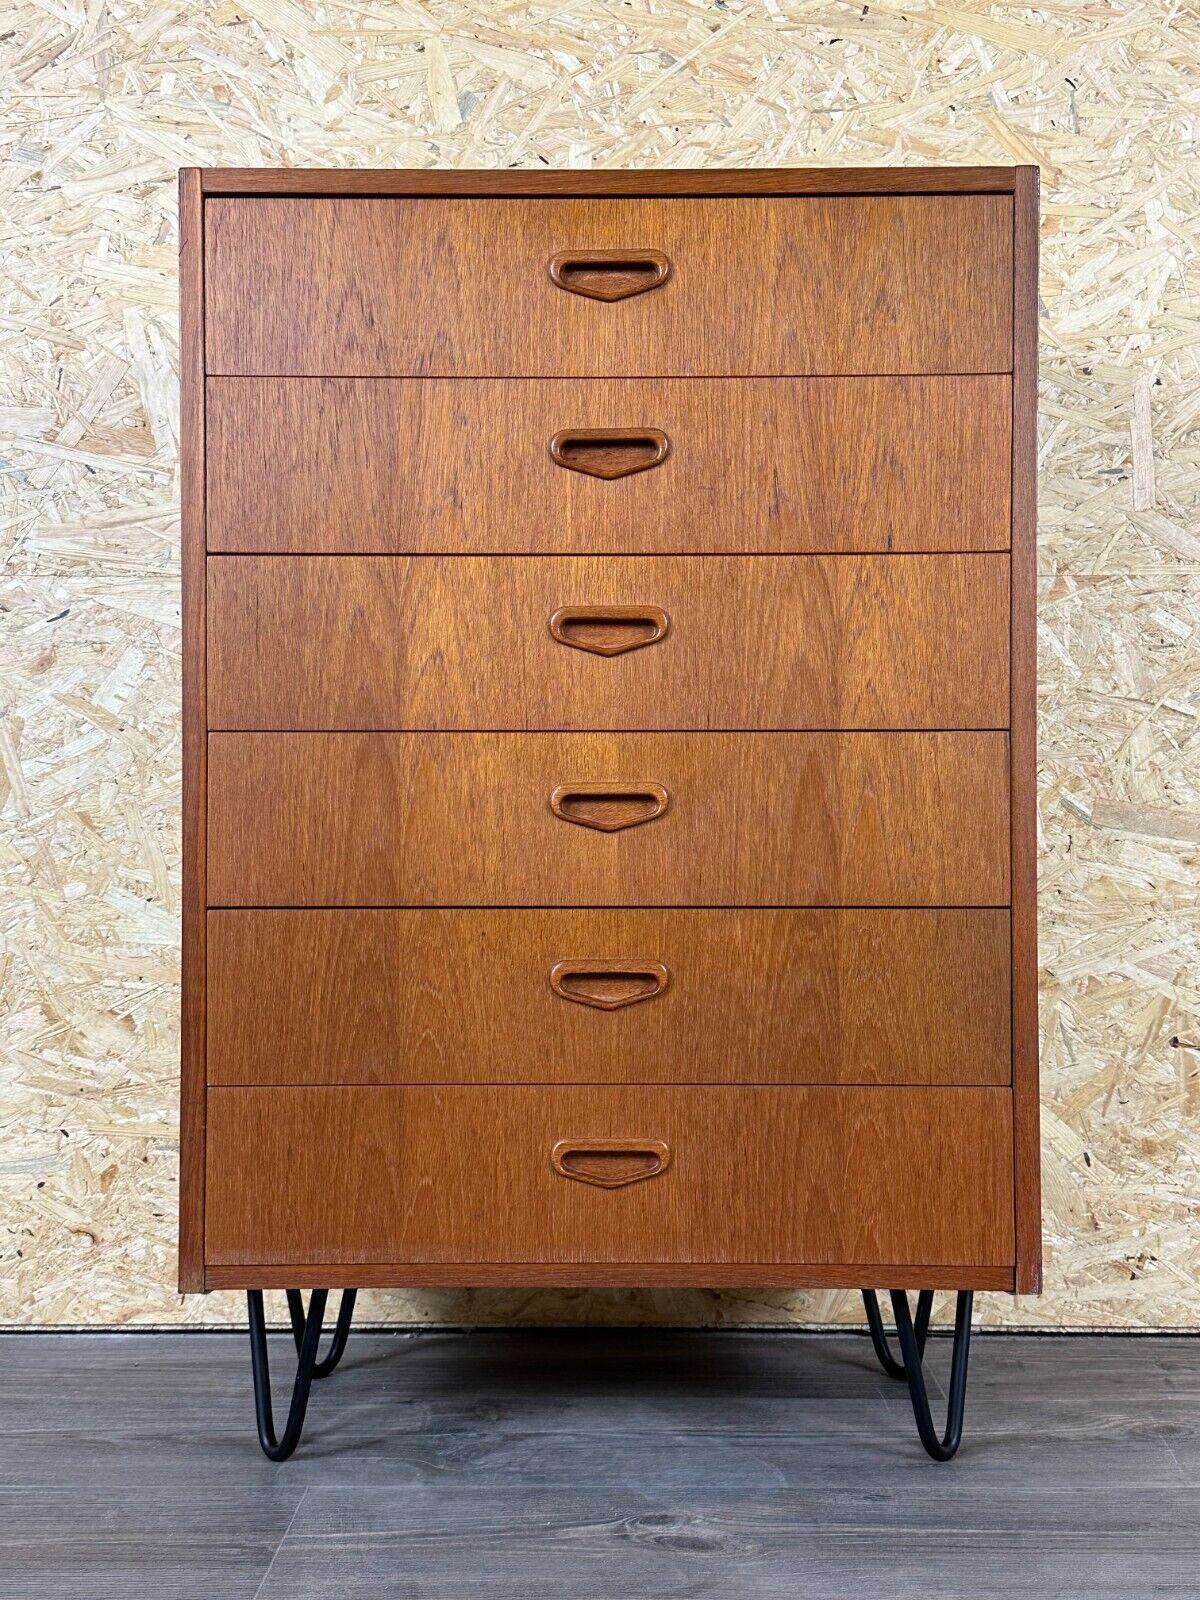 60s cabinet